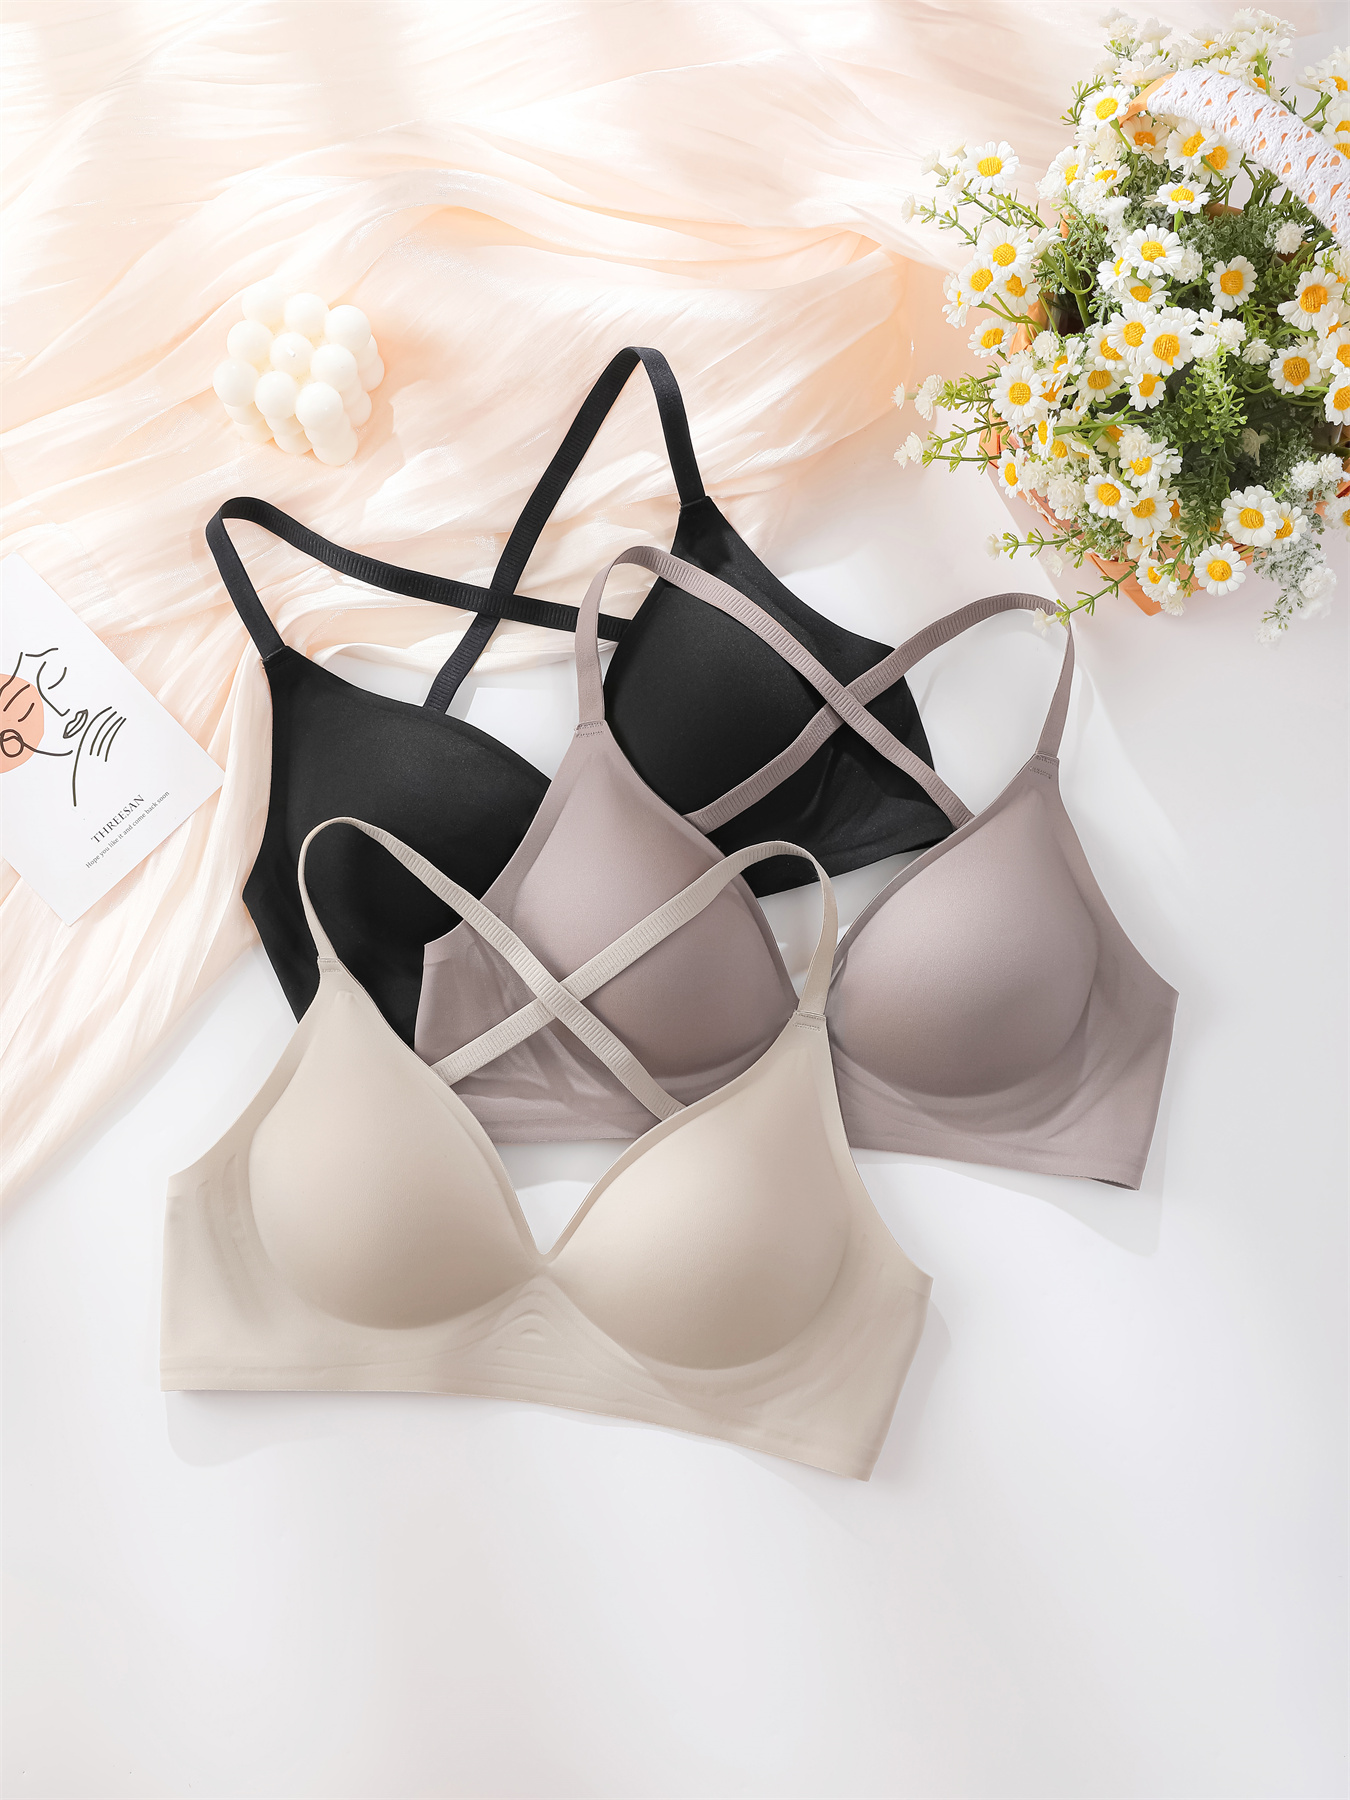 Bseka Clearance items!Sexy Bras Lingerie For Women Cross Back Comfort  Wirefree Seamless Bra Bra With Clear Straps Womens Tank Tops With Built In  Bra